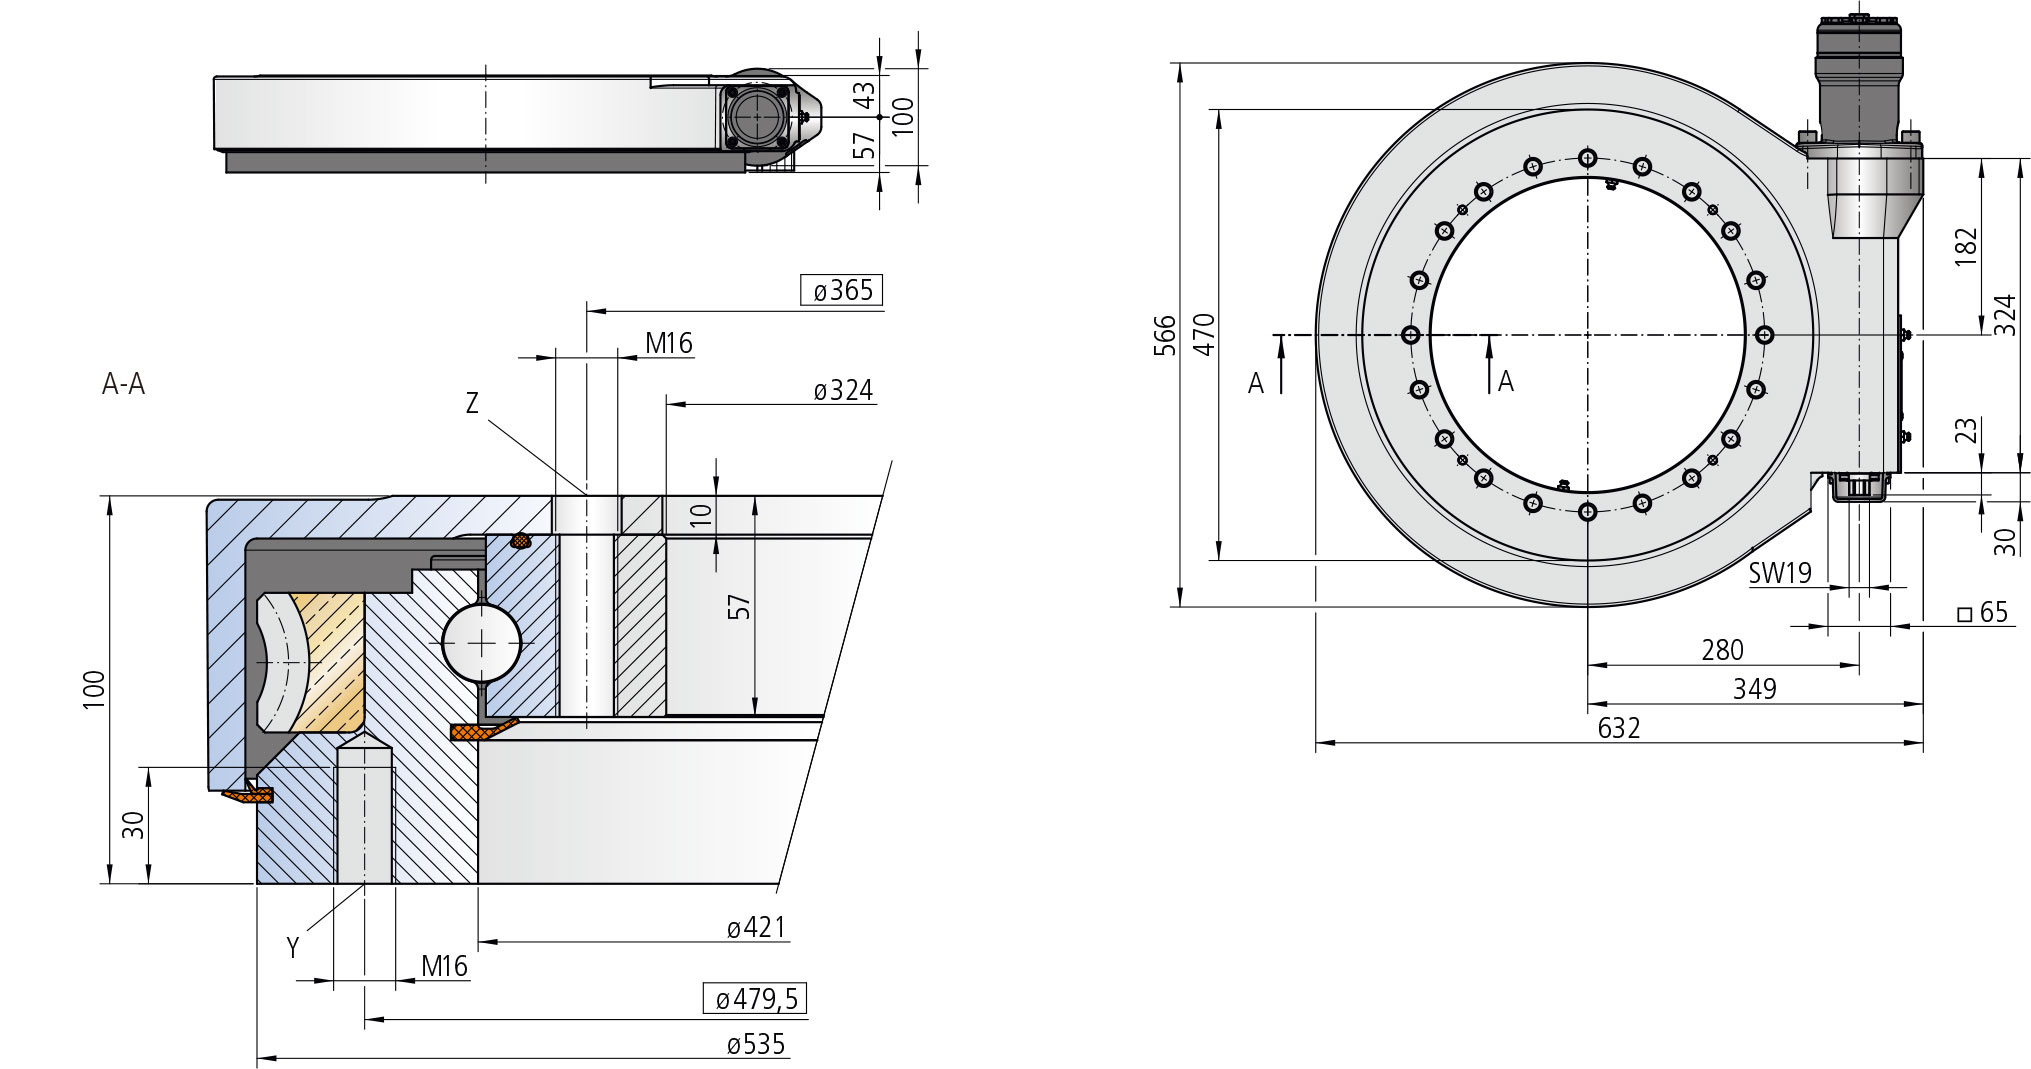 WD-LC 0419 / 1-row / 1 drive WD-L Series cad drawing